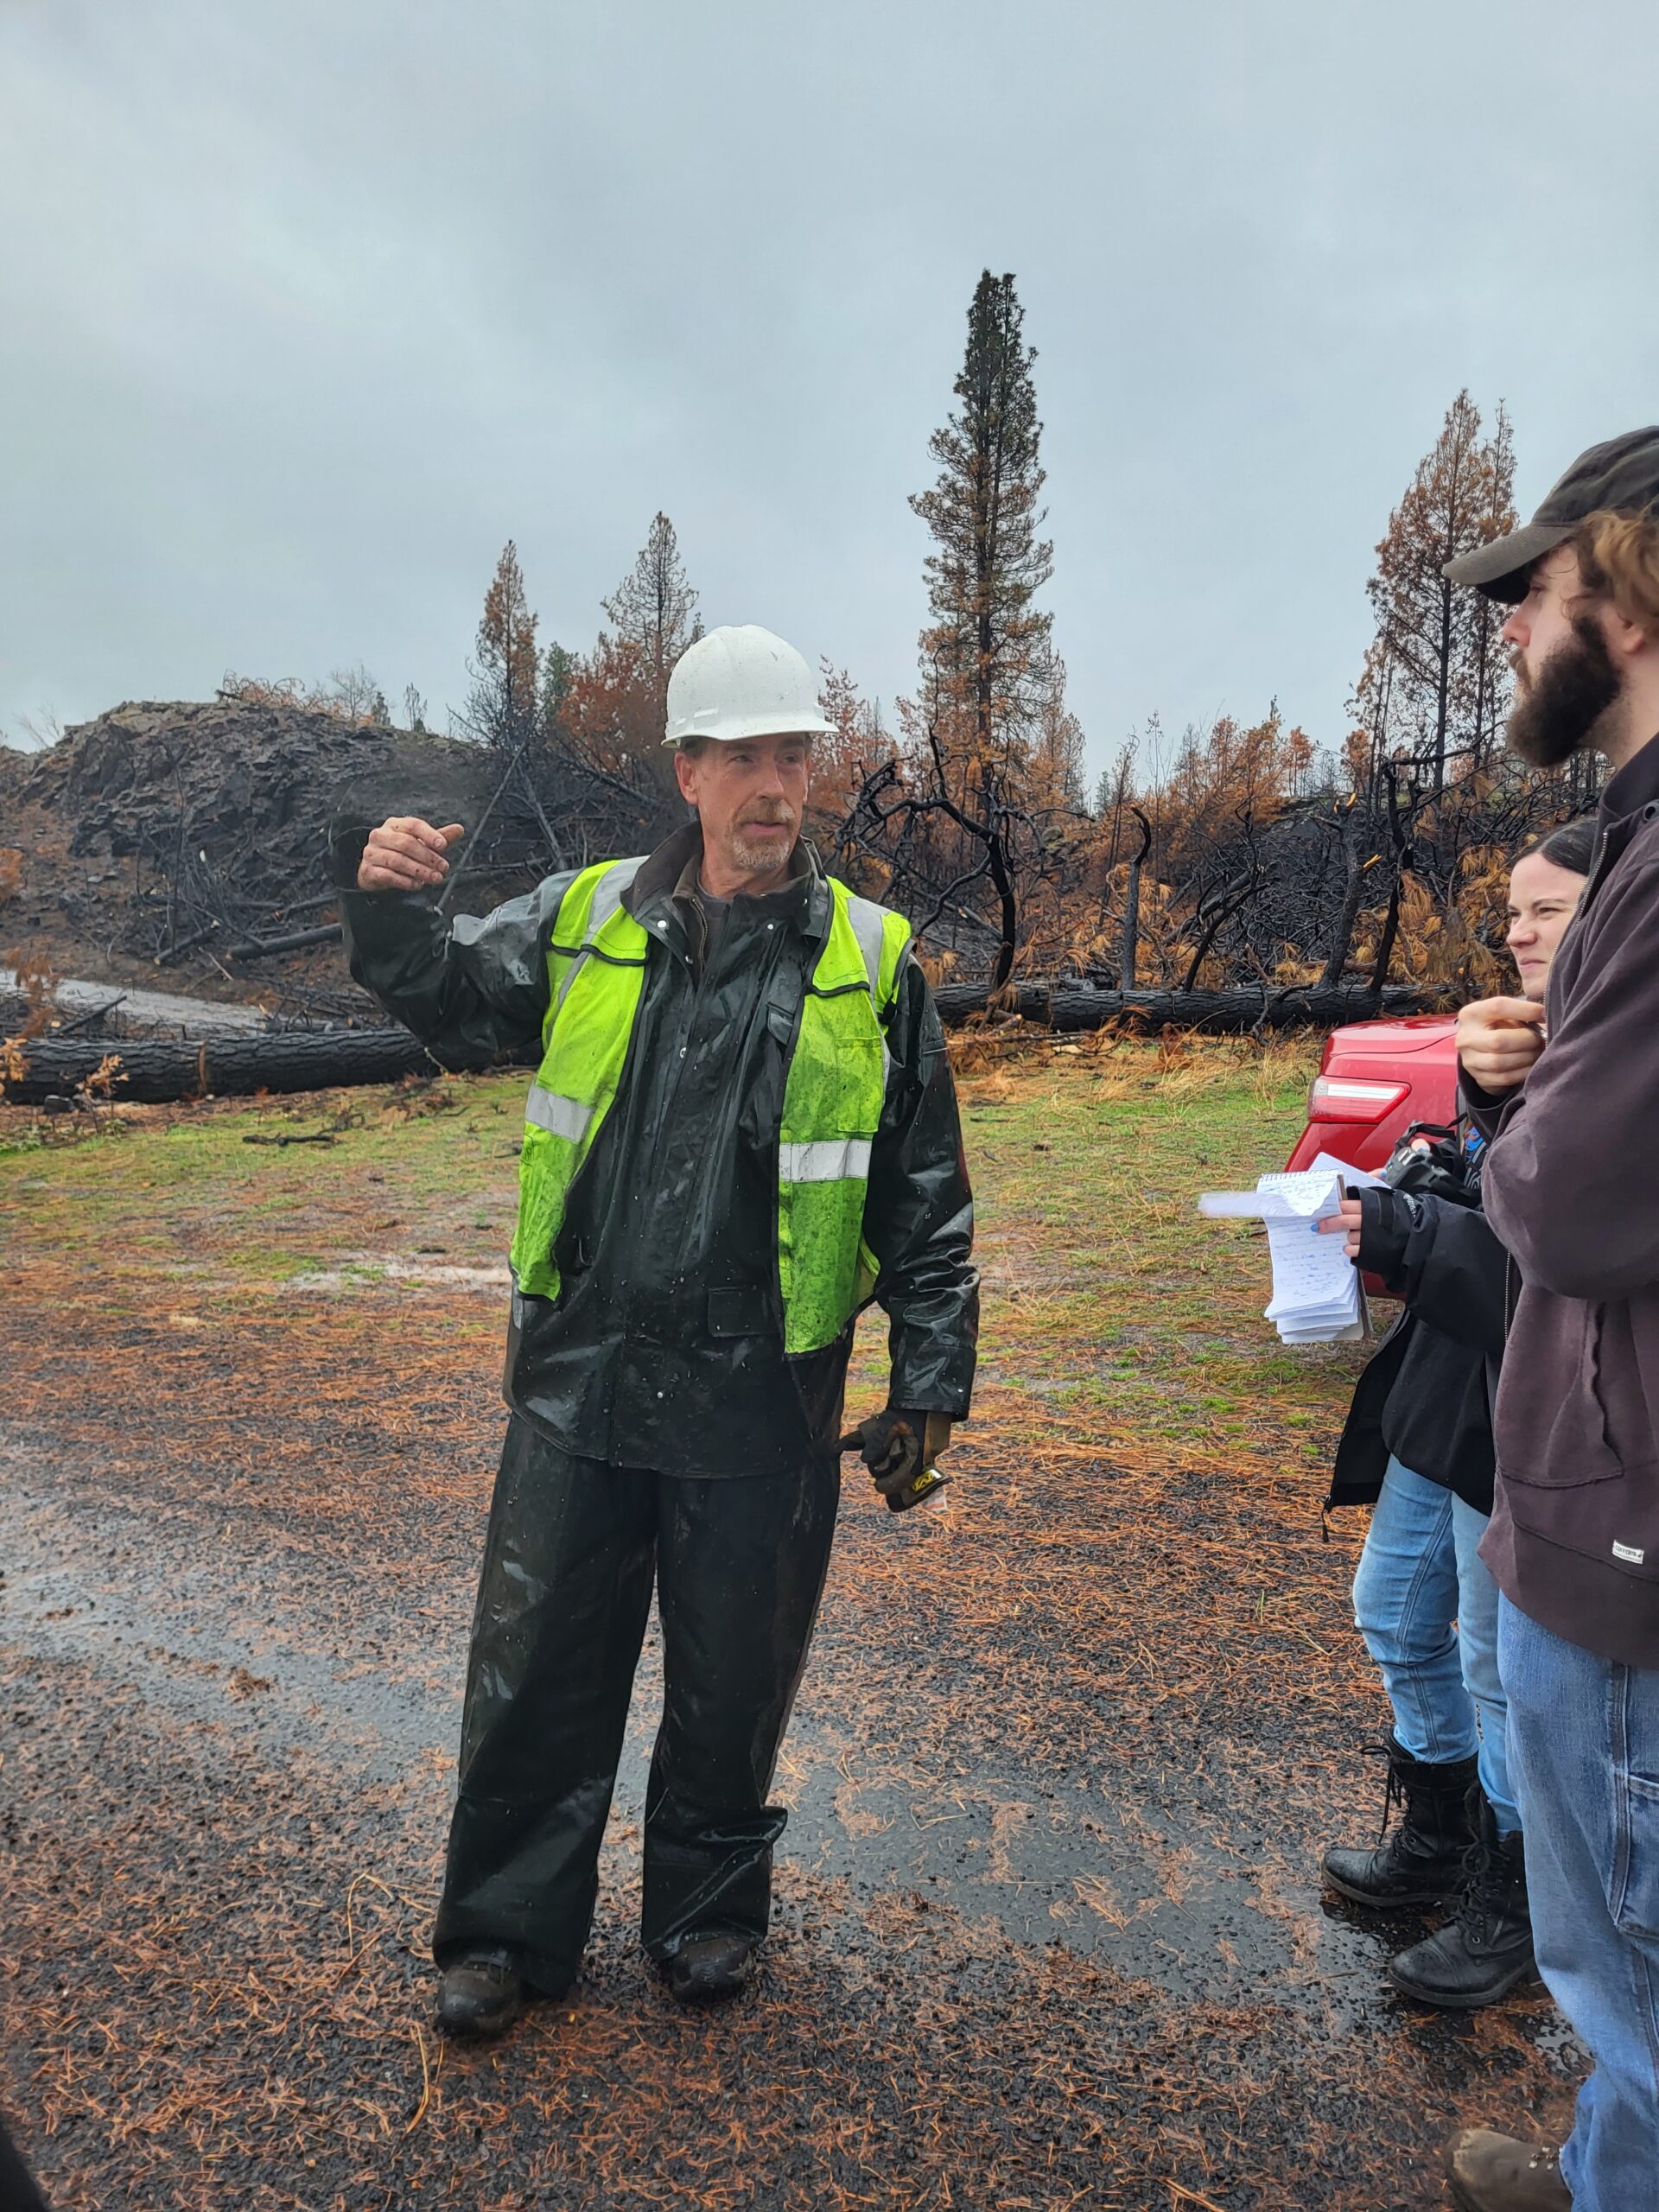 A traffic volunteer talking with other volunteers about the damage caused by the fire, gesturing to the debris.